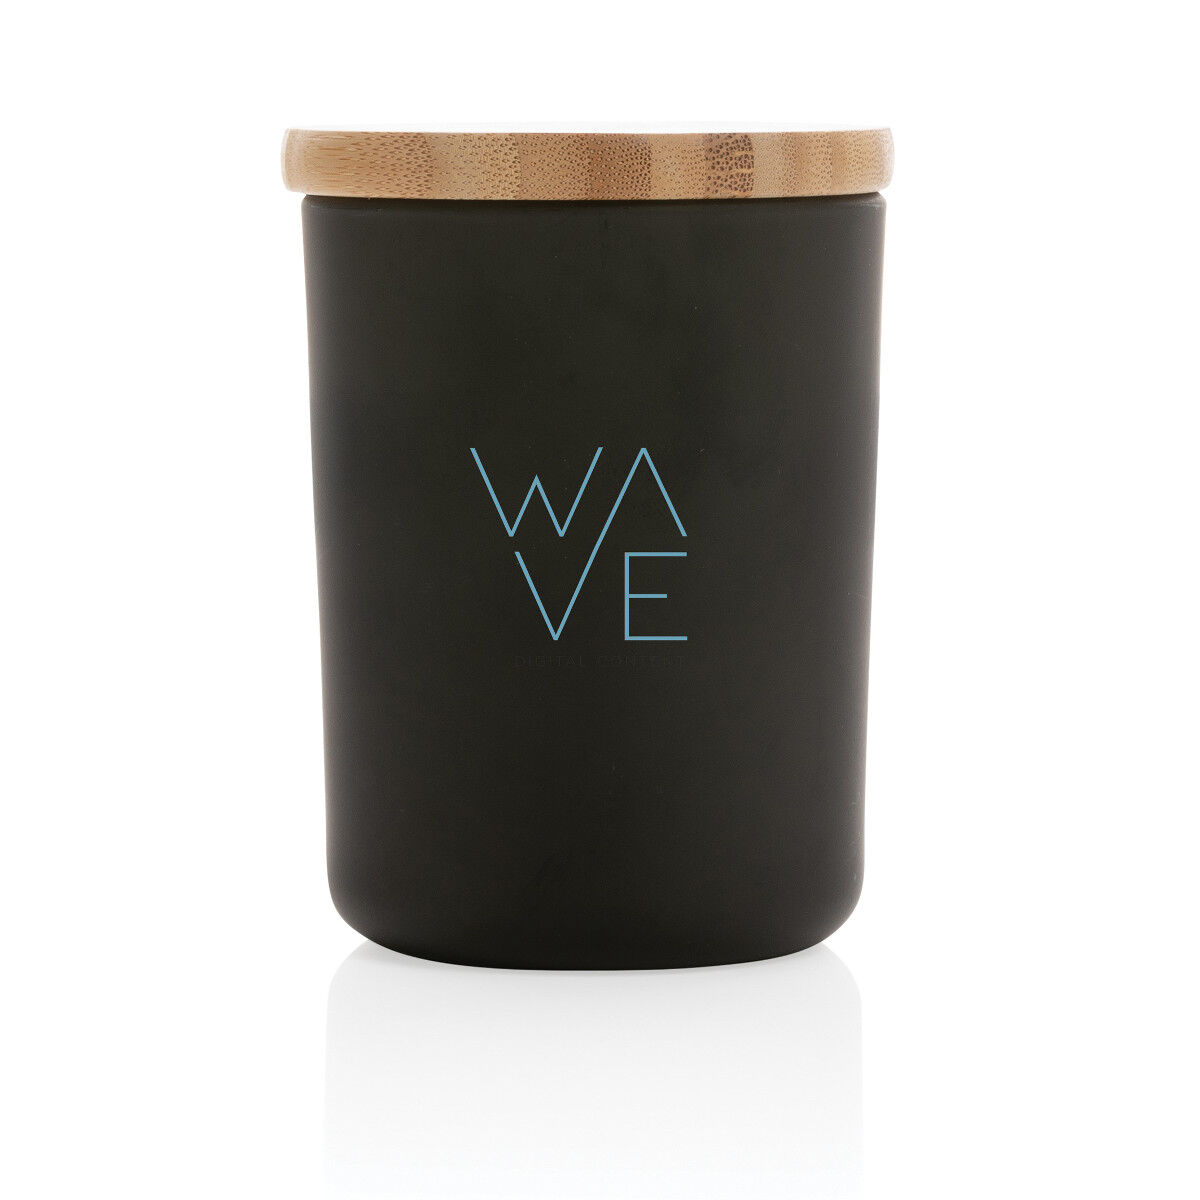 Scented candle with bamboo lid (sample branding)